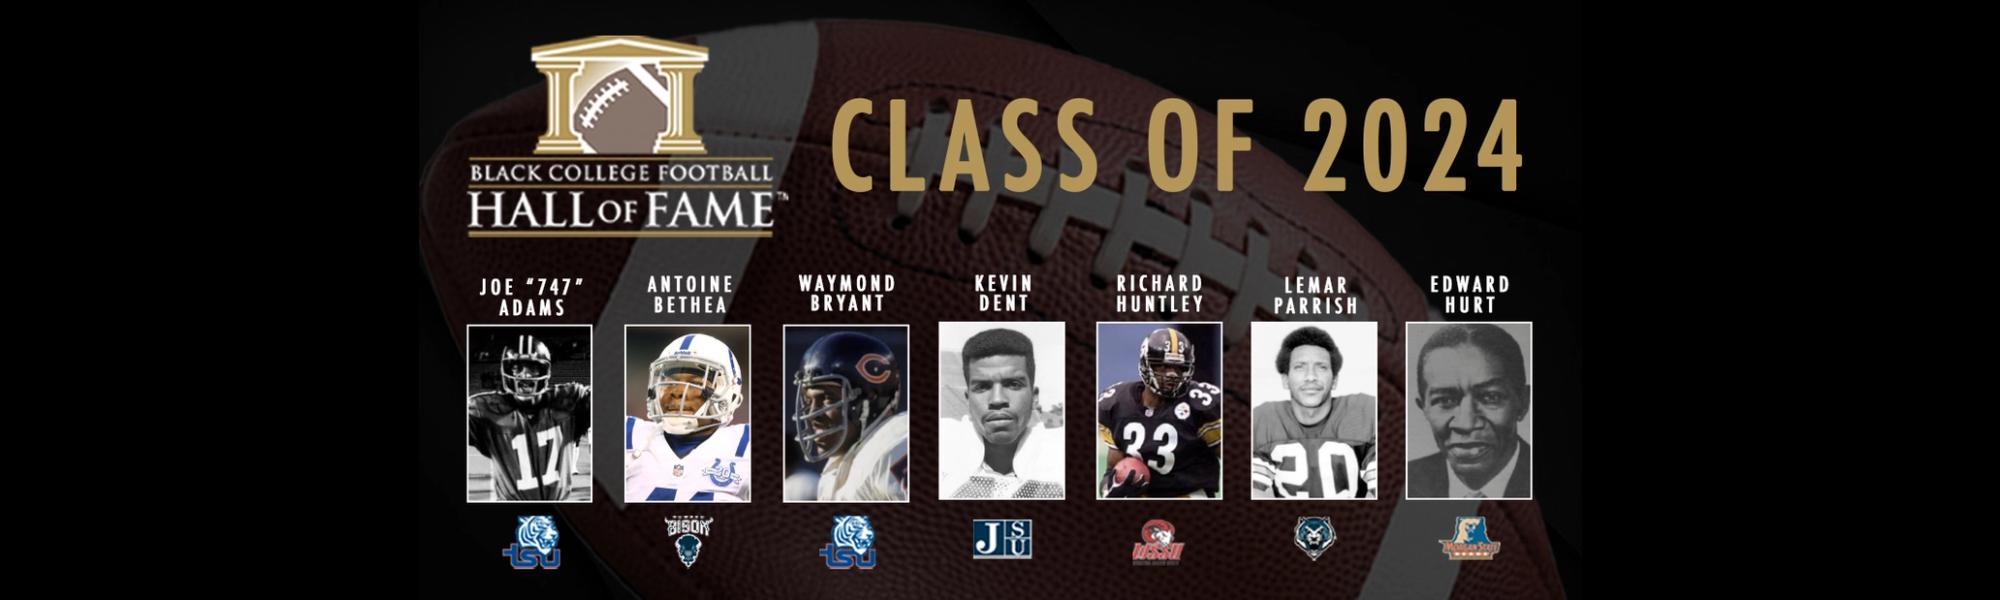 Black College Football Hall of Fame Class of 2024 Announced